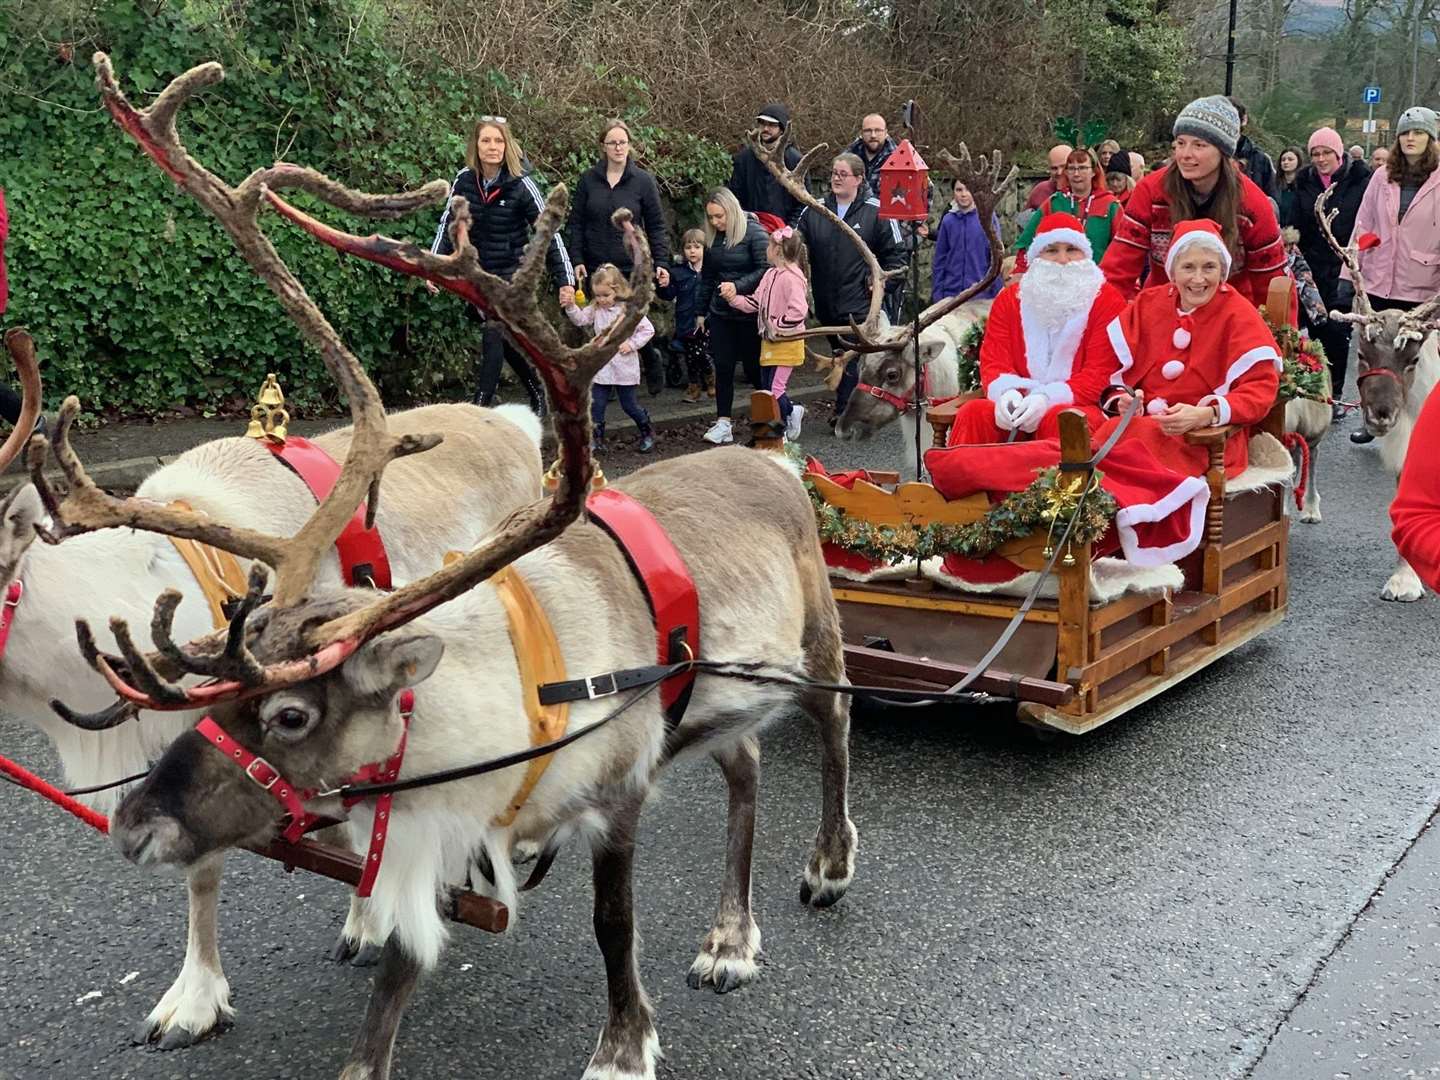 Santa Claus was pulled in his sled down Main Street to Lairg Community Centre.